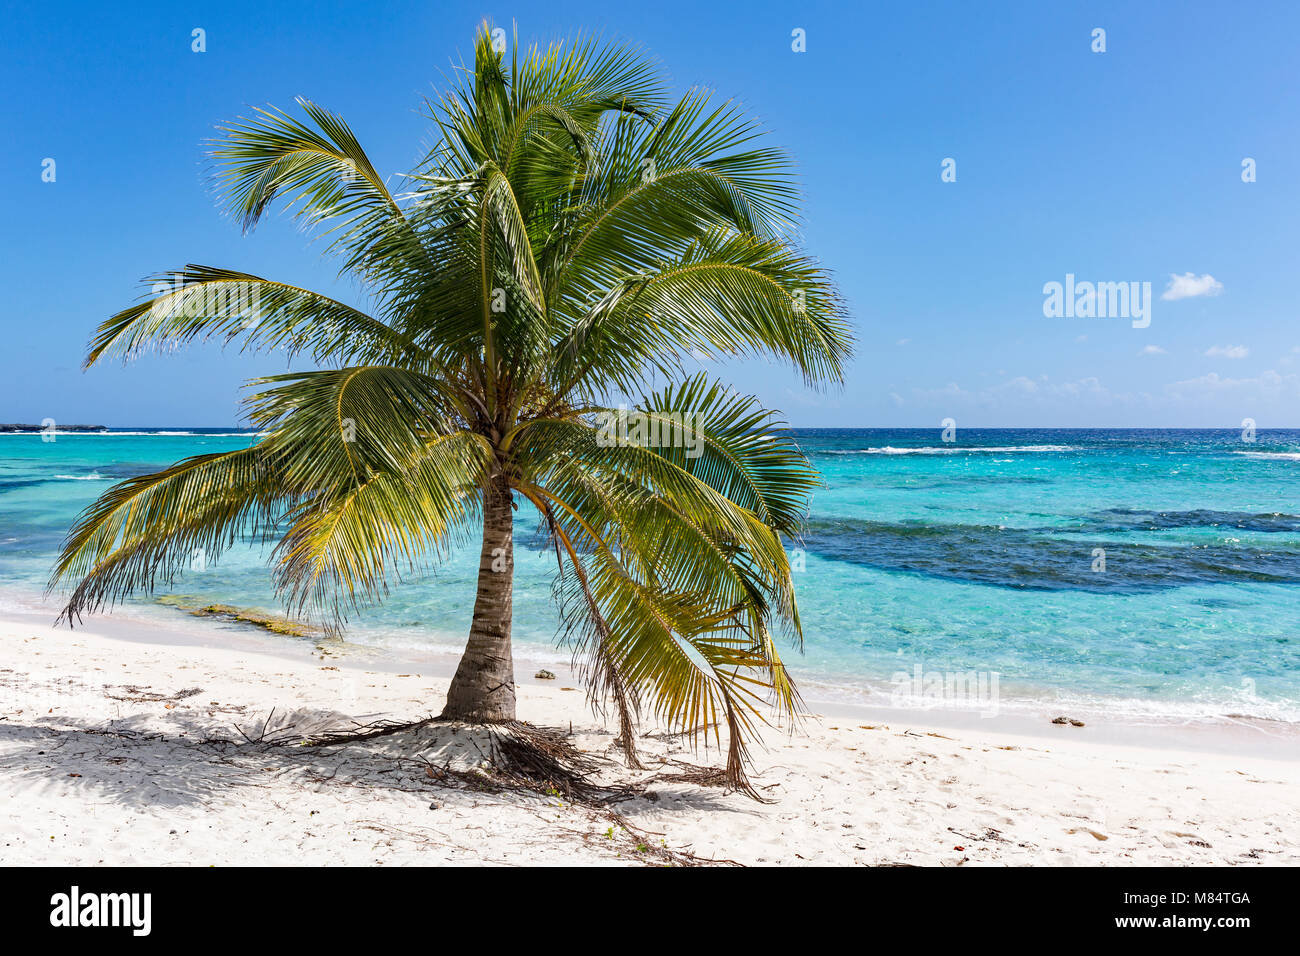 A lone plam tree on Spotts Beach in Savannah on the South side of Grand Cayman, Cayman Islands Stock Photo